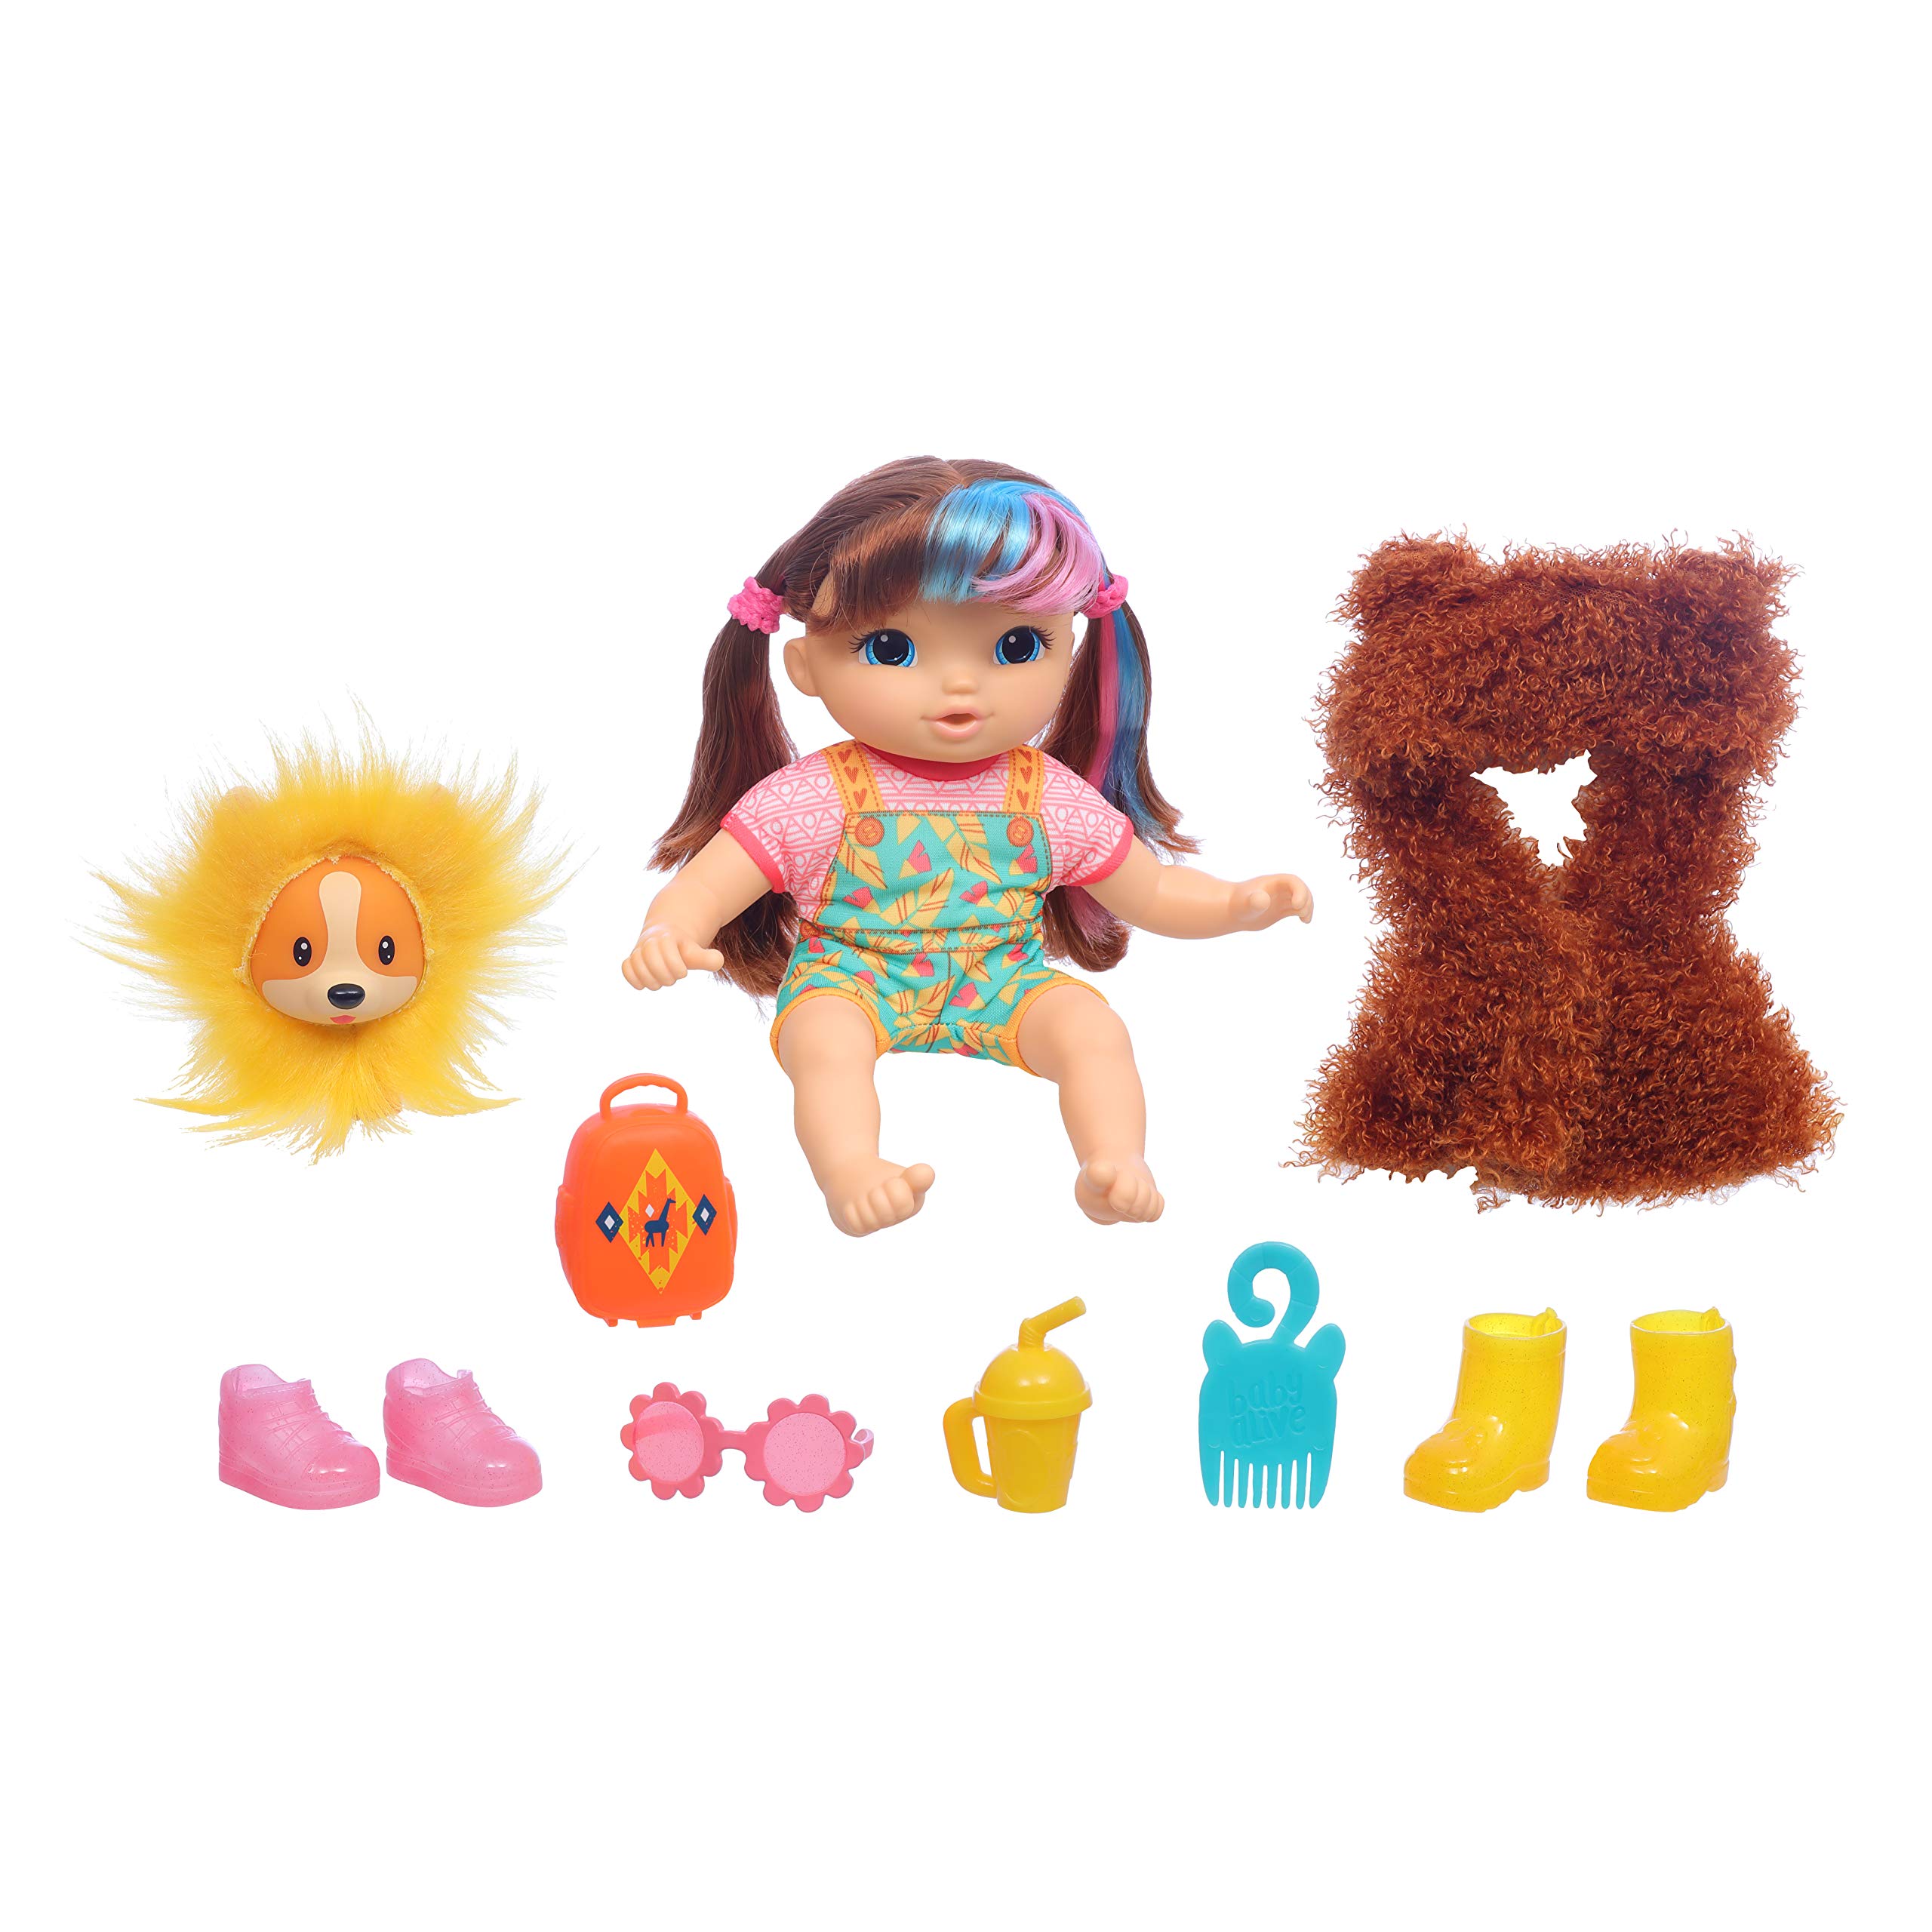 Baby Alive Littles Fantasy Styles Squad Doll, Little Harlyn, Safari Accessories, Straight Brown Hair Toy for Kids Ages 3 Years and Up (Amazon Exclusive)